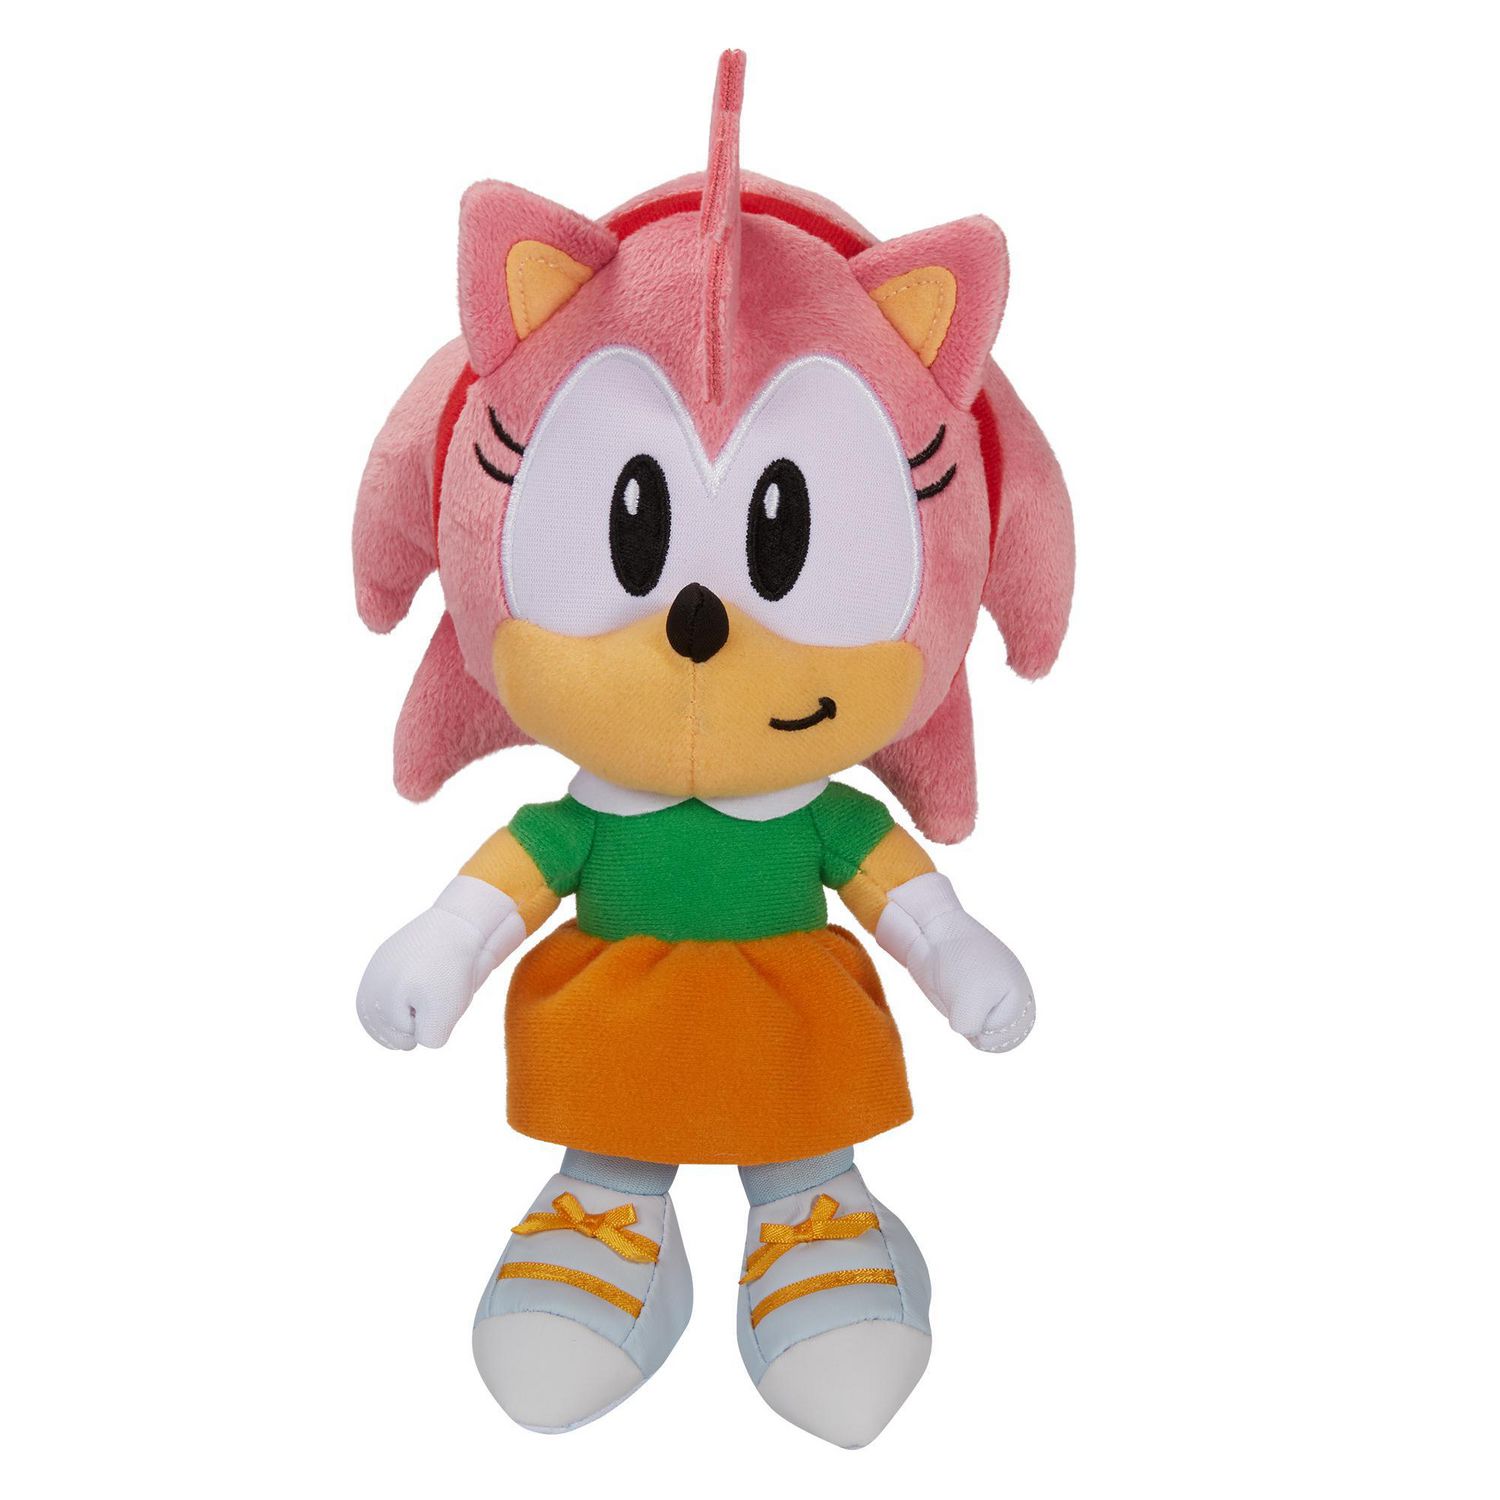 Buy Sitting Amy Rose SD - Sonic The Hedgehog 8 Plush (Great Eastern) 